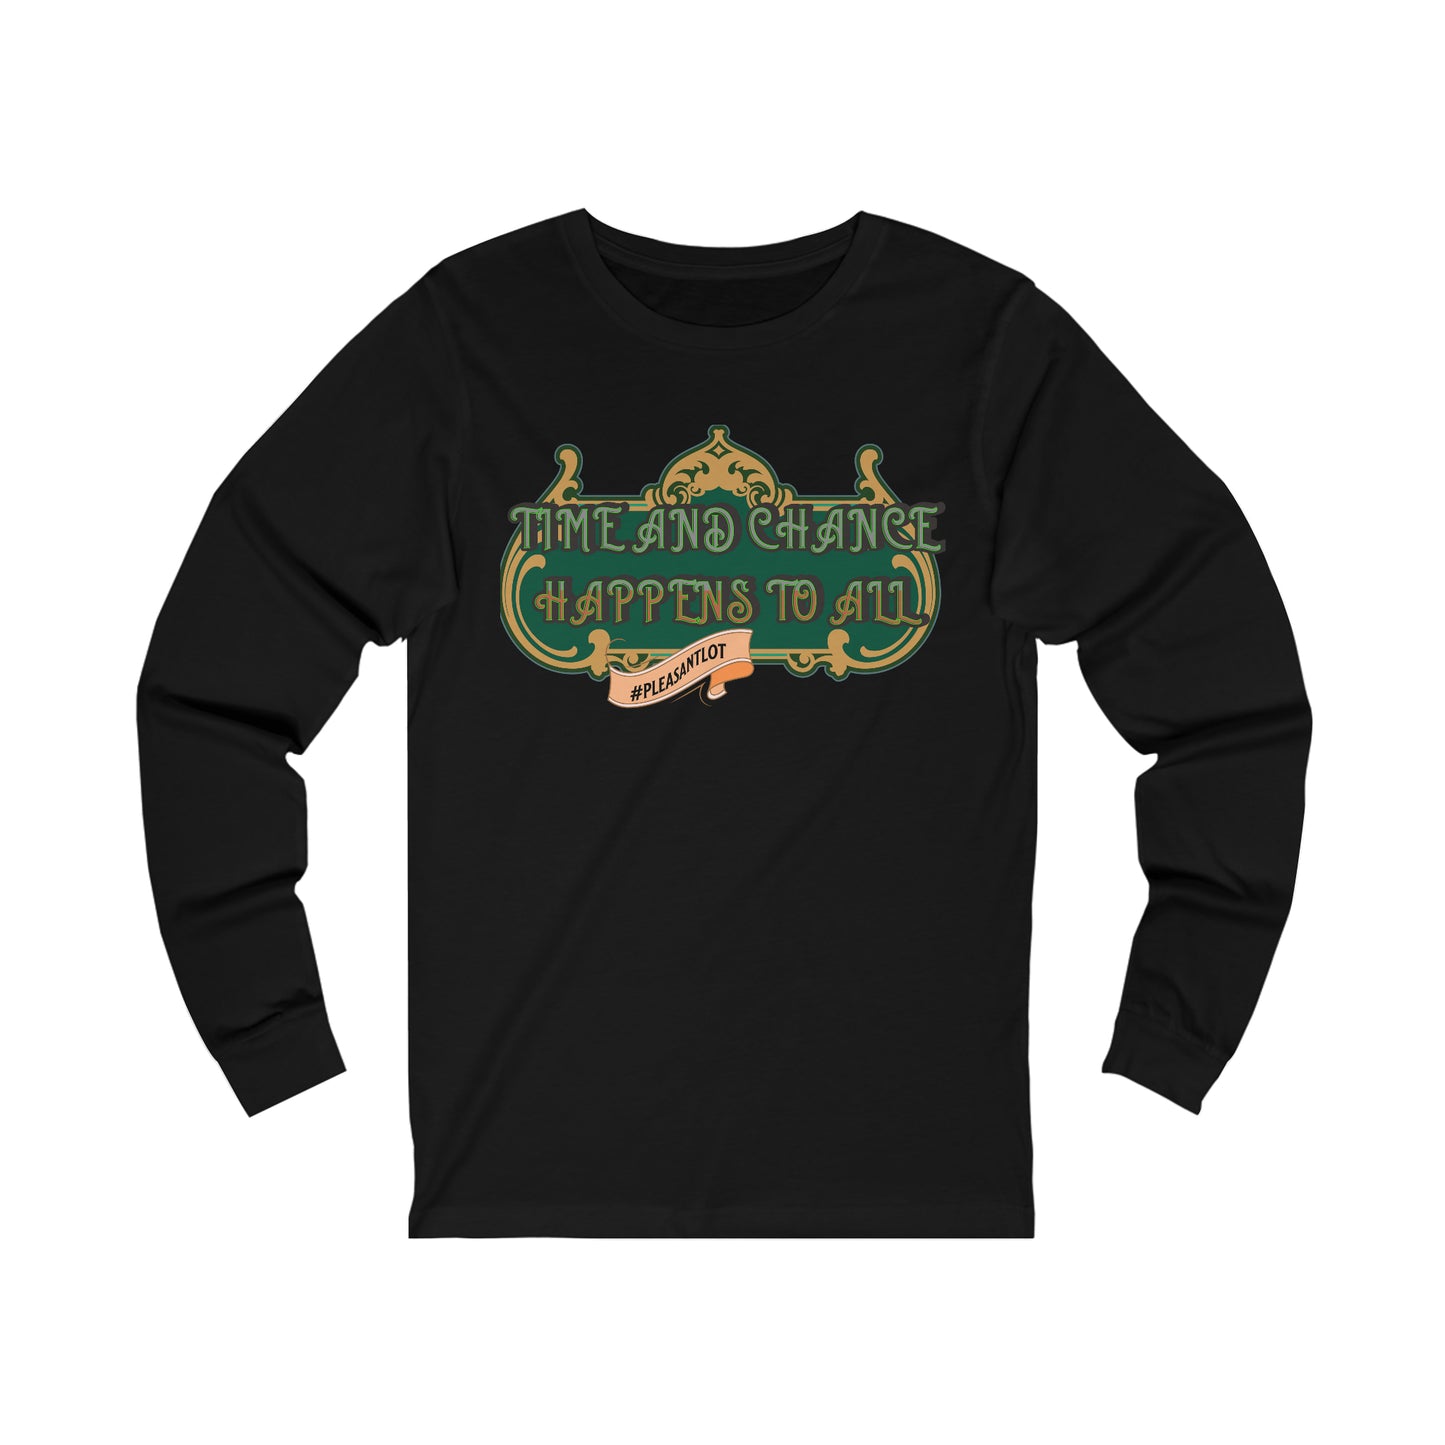 Everyday Unisex Longsleeve Shirt, Men and Women sweet attire (Time And Chance Happens To All), Green and Gold Design